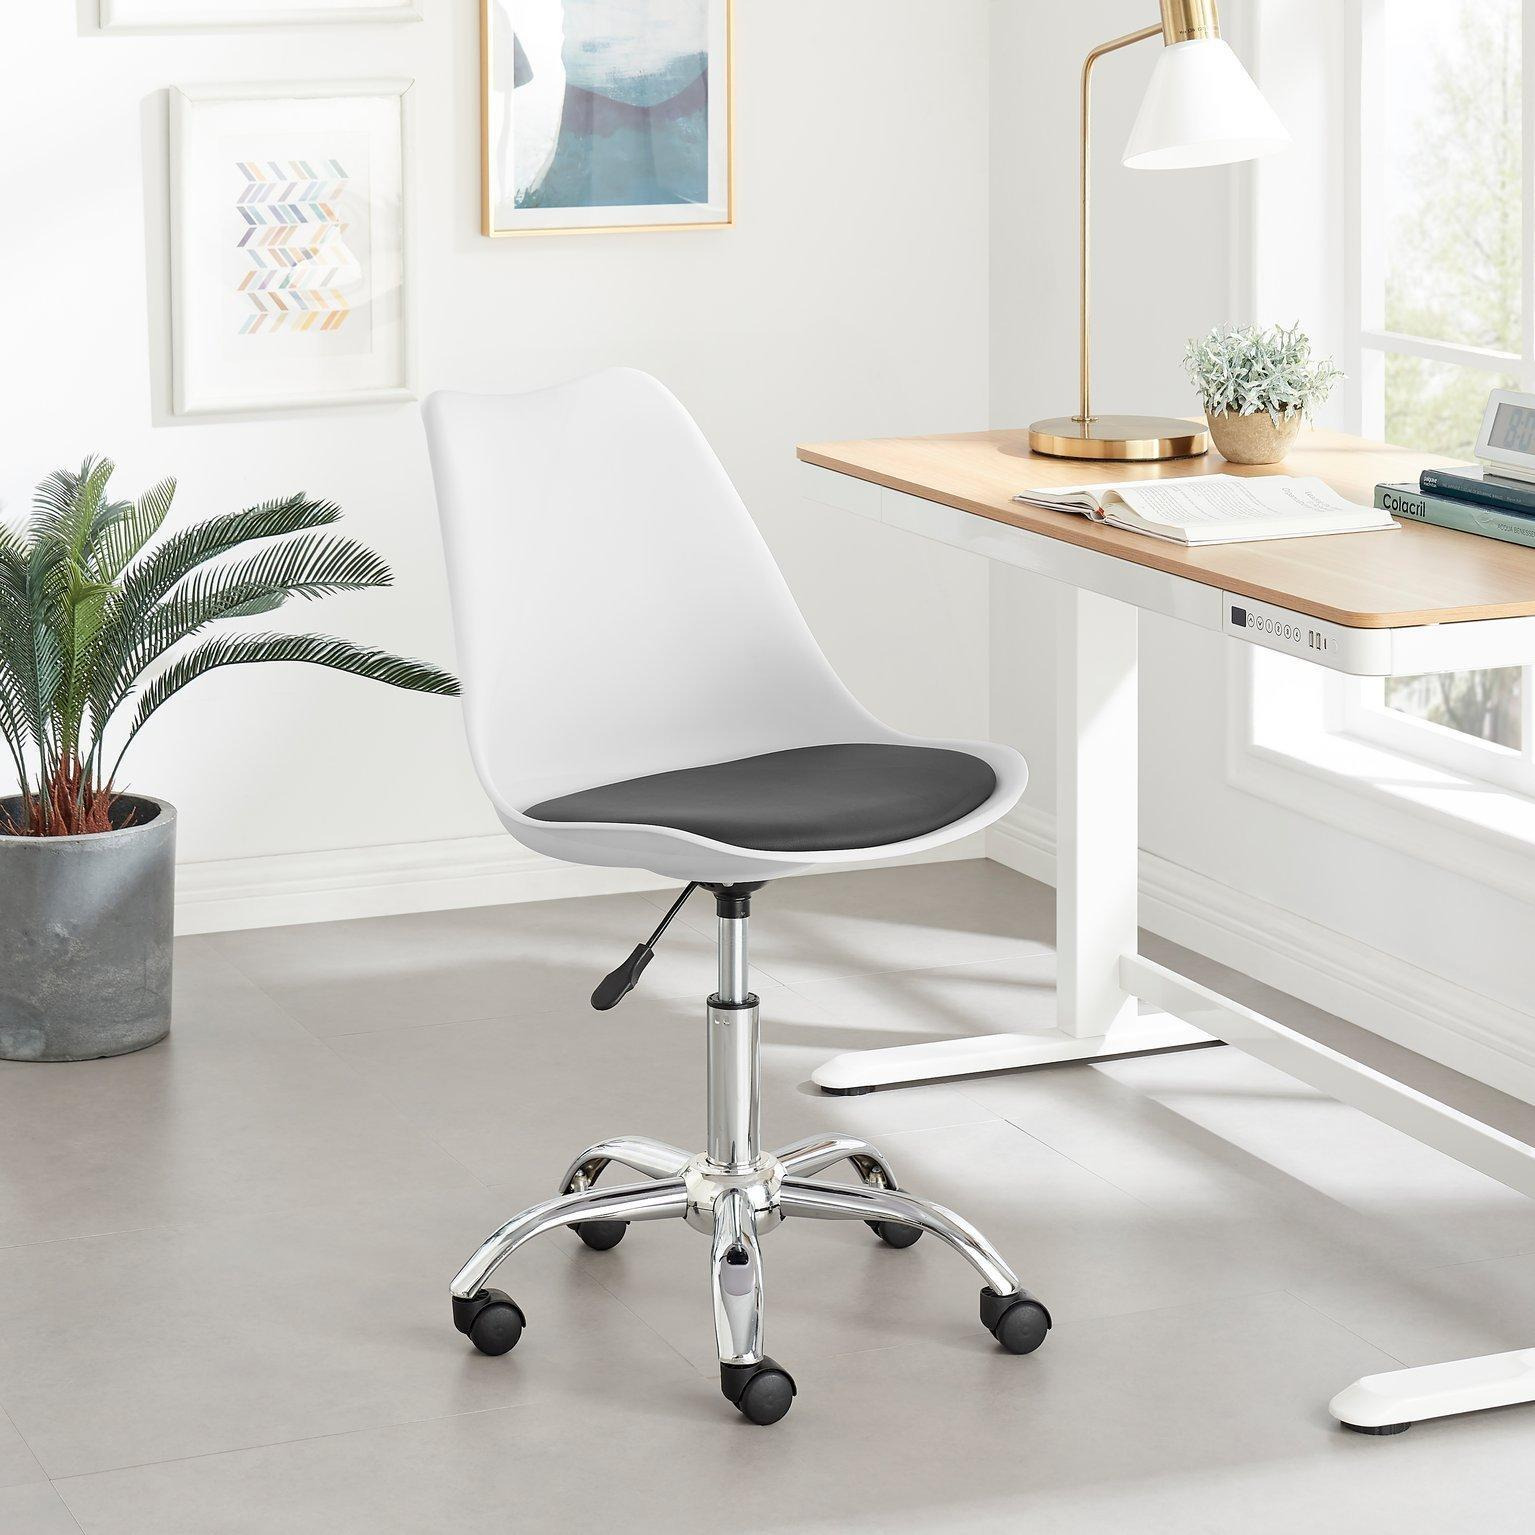 Oslo Scandi Inspired Office Chair With A Comfortable Faux Leather Seat Cushion - image 1